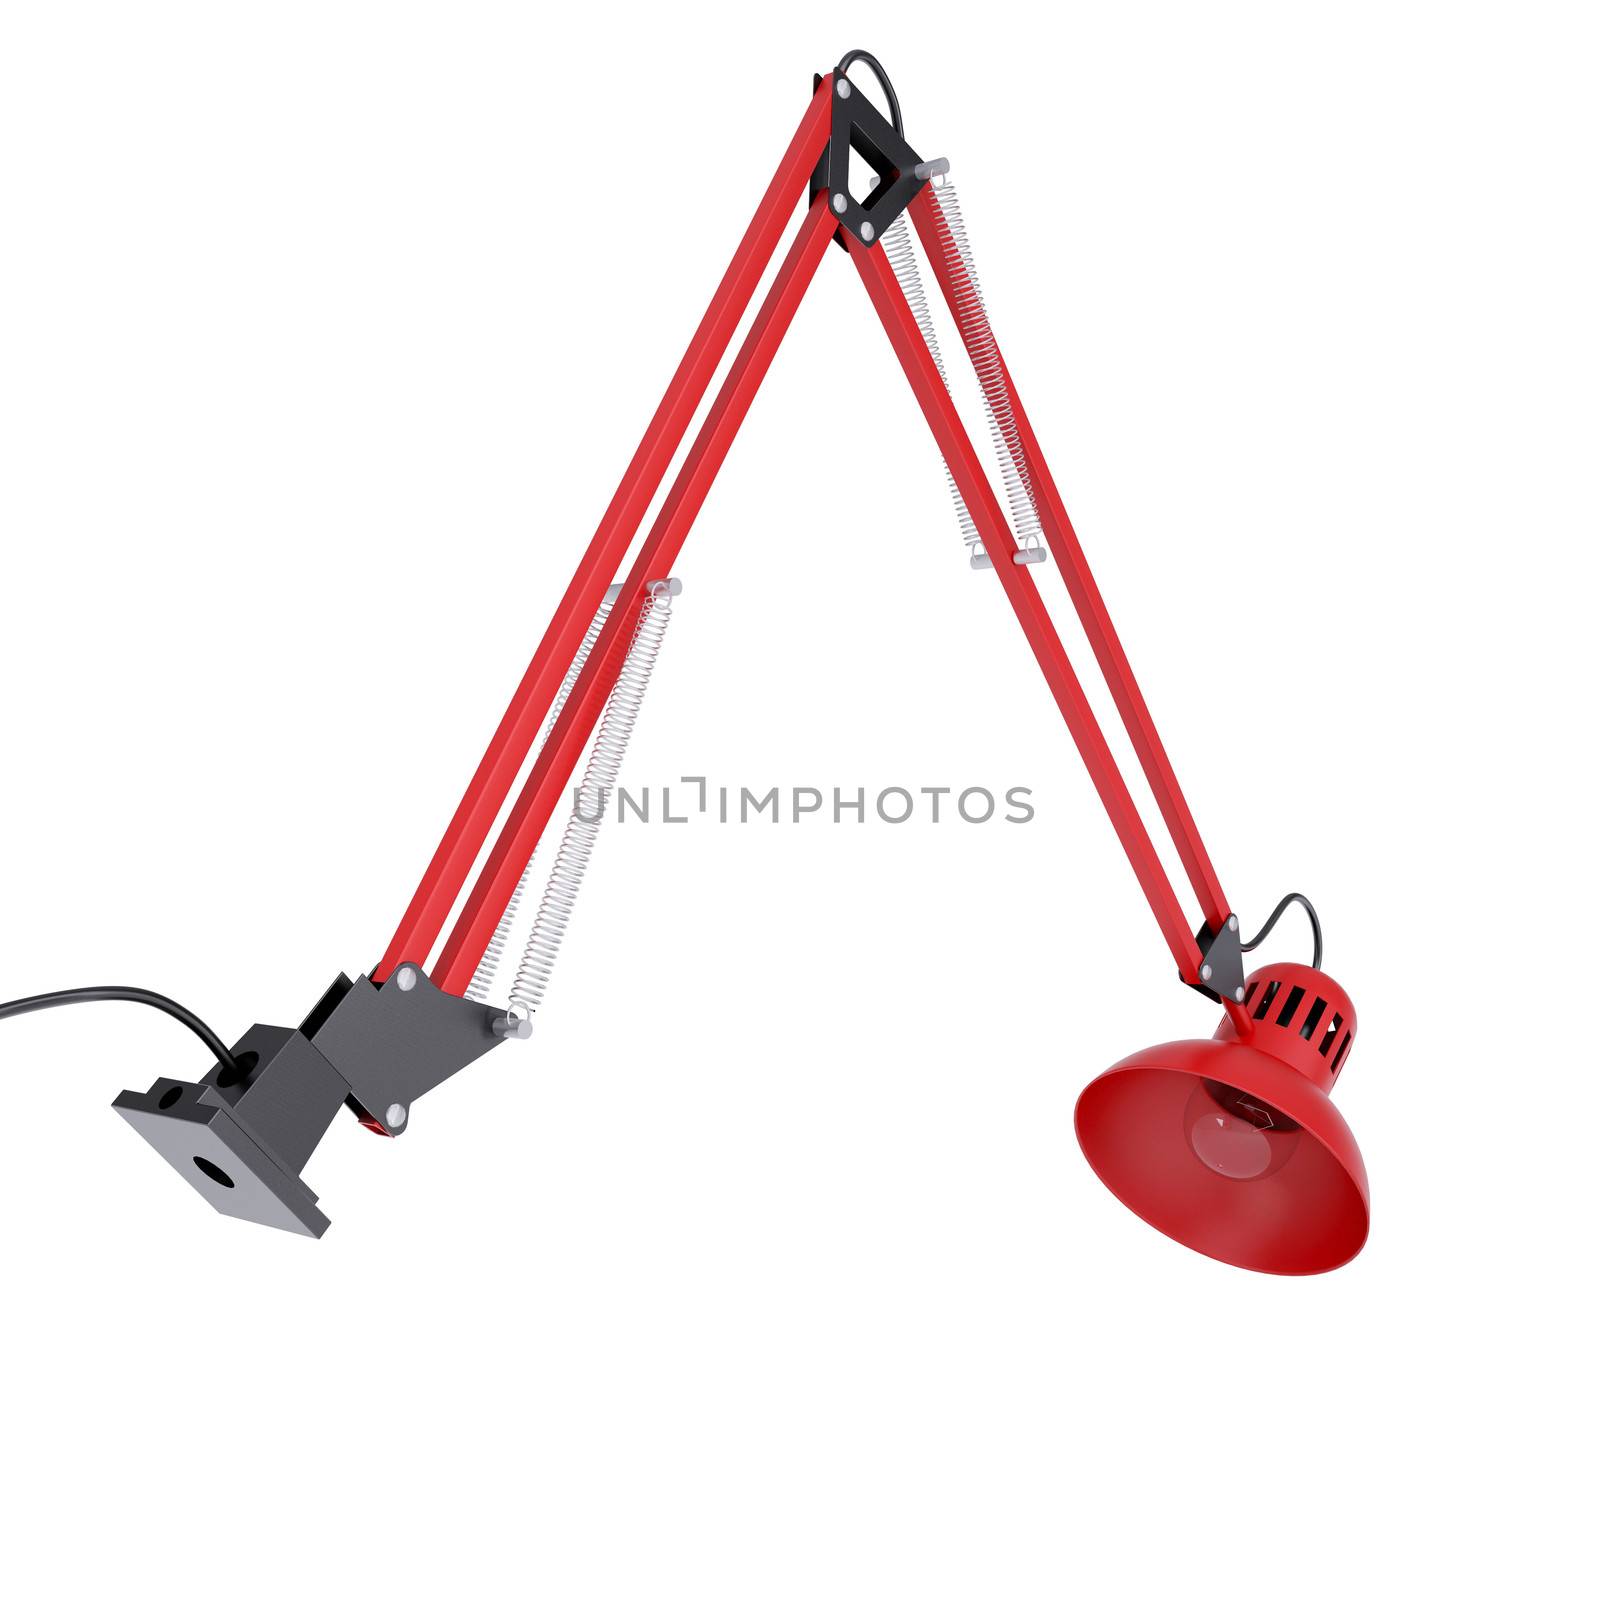 Red table lamp. Isolated render on white background